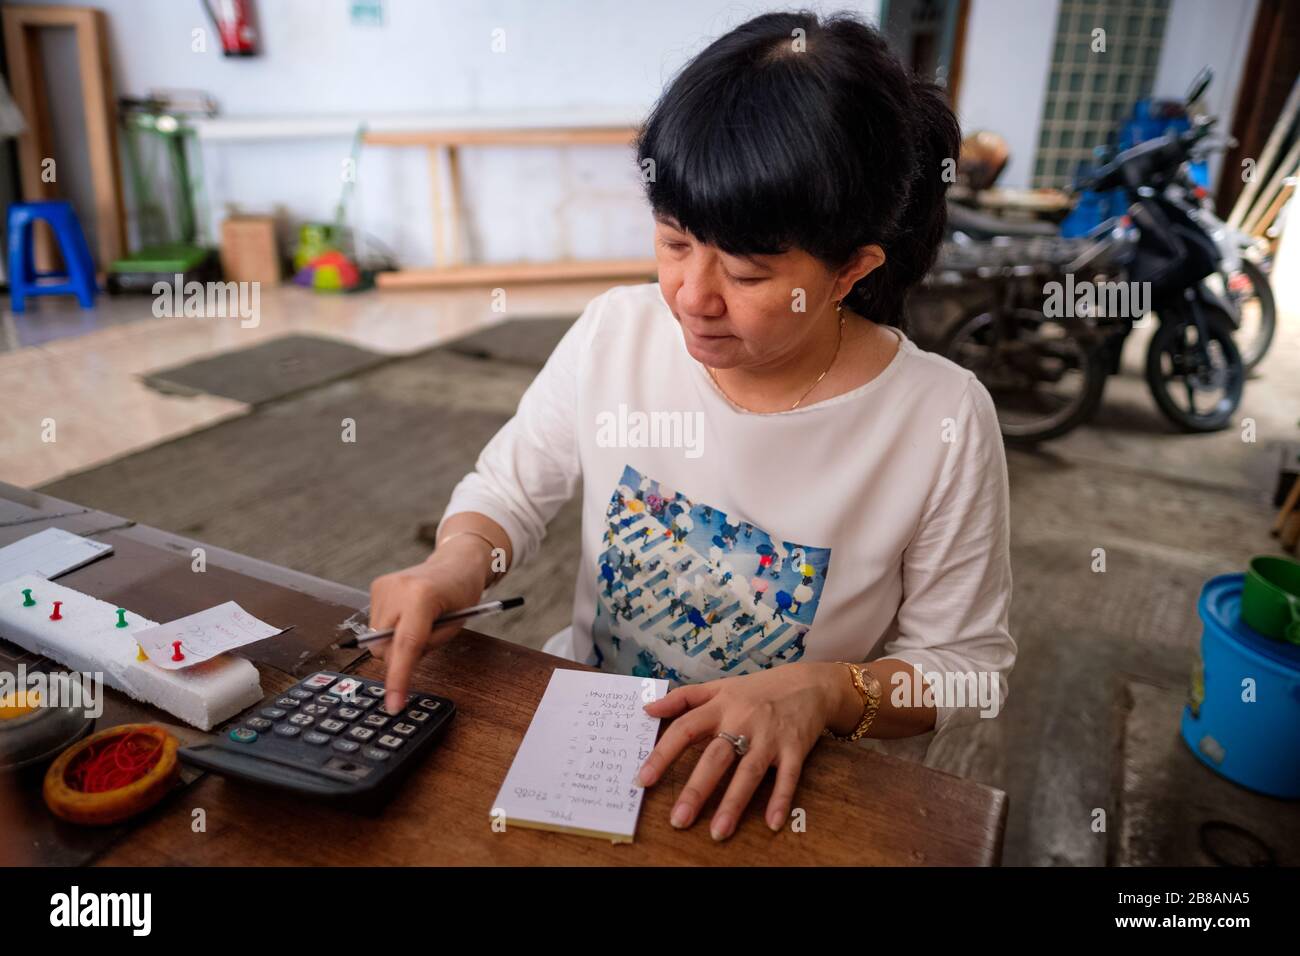 Asian Indonesian women, the owner of small local family-owned business store, or locally called warung, calculating profit by her desk. Selective Focu Stock Photo